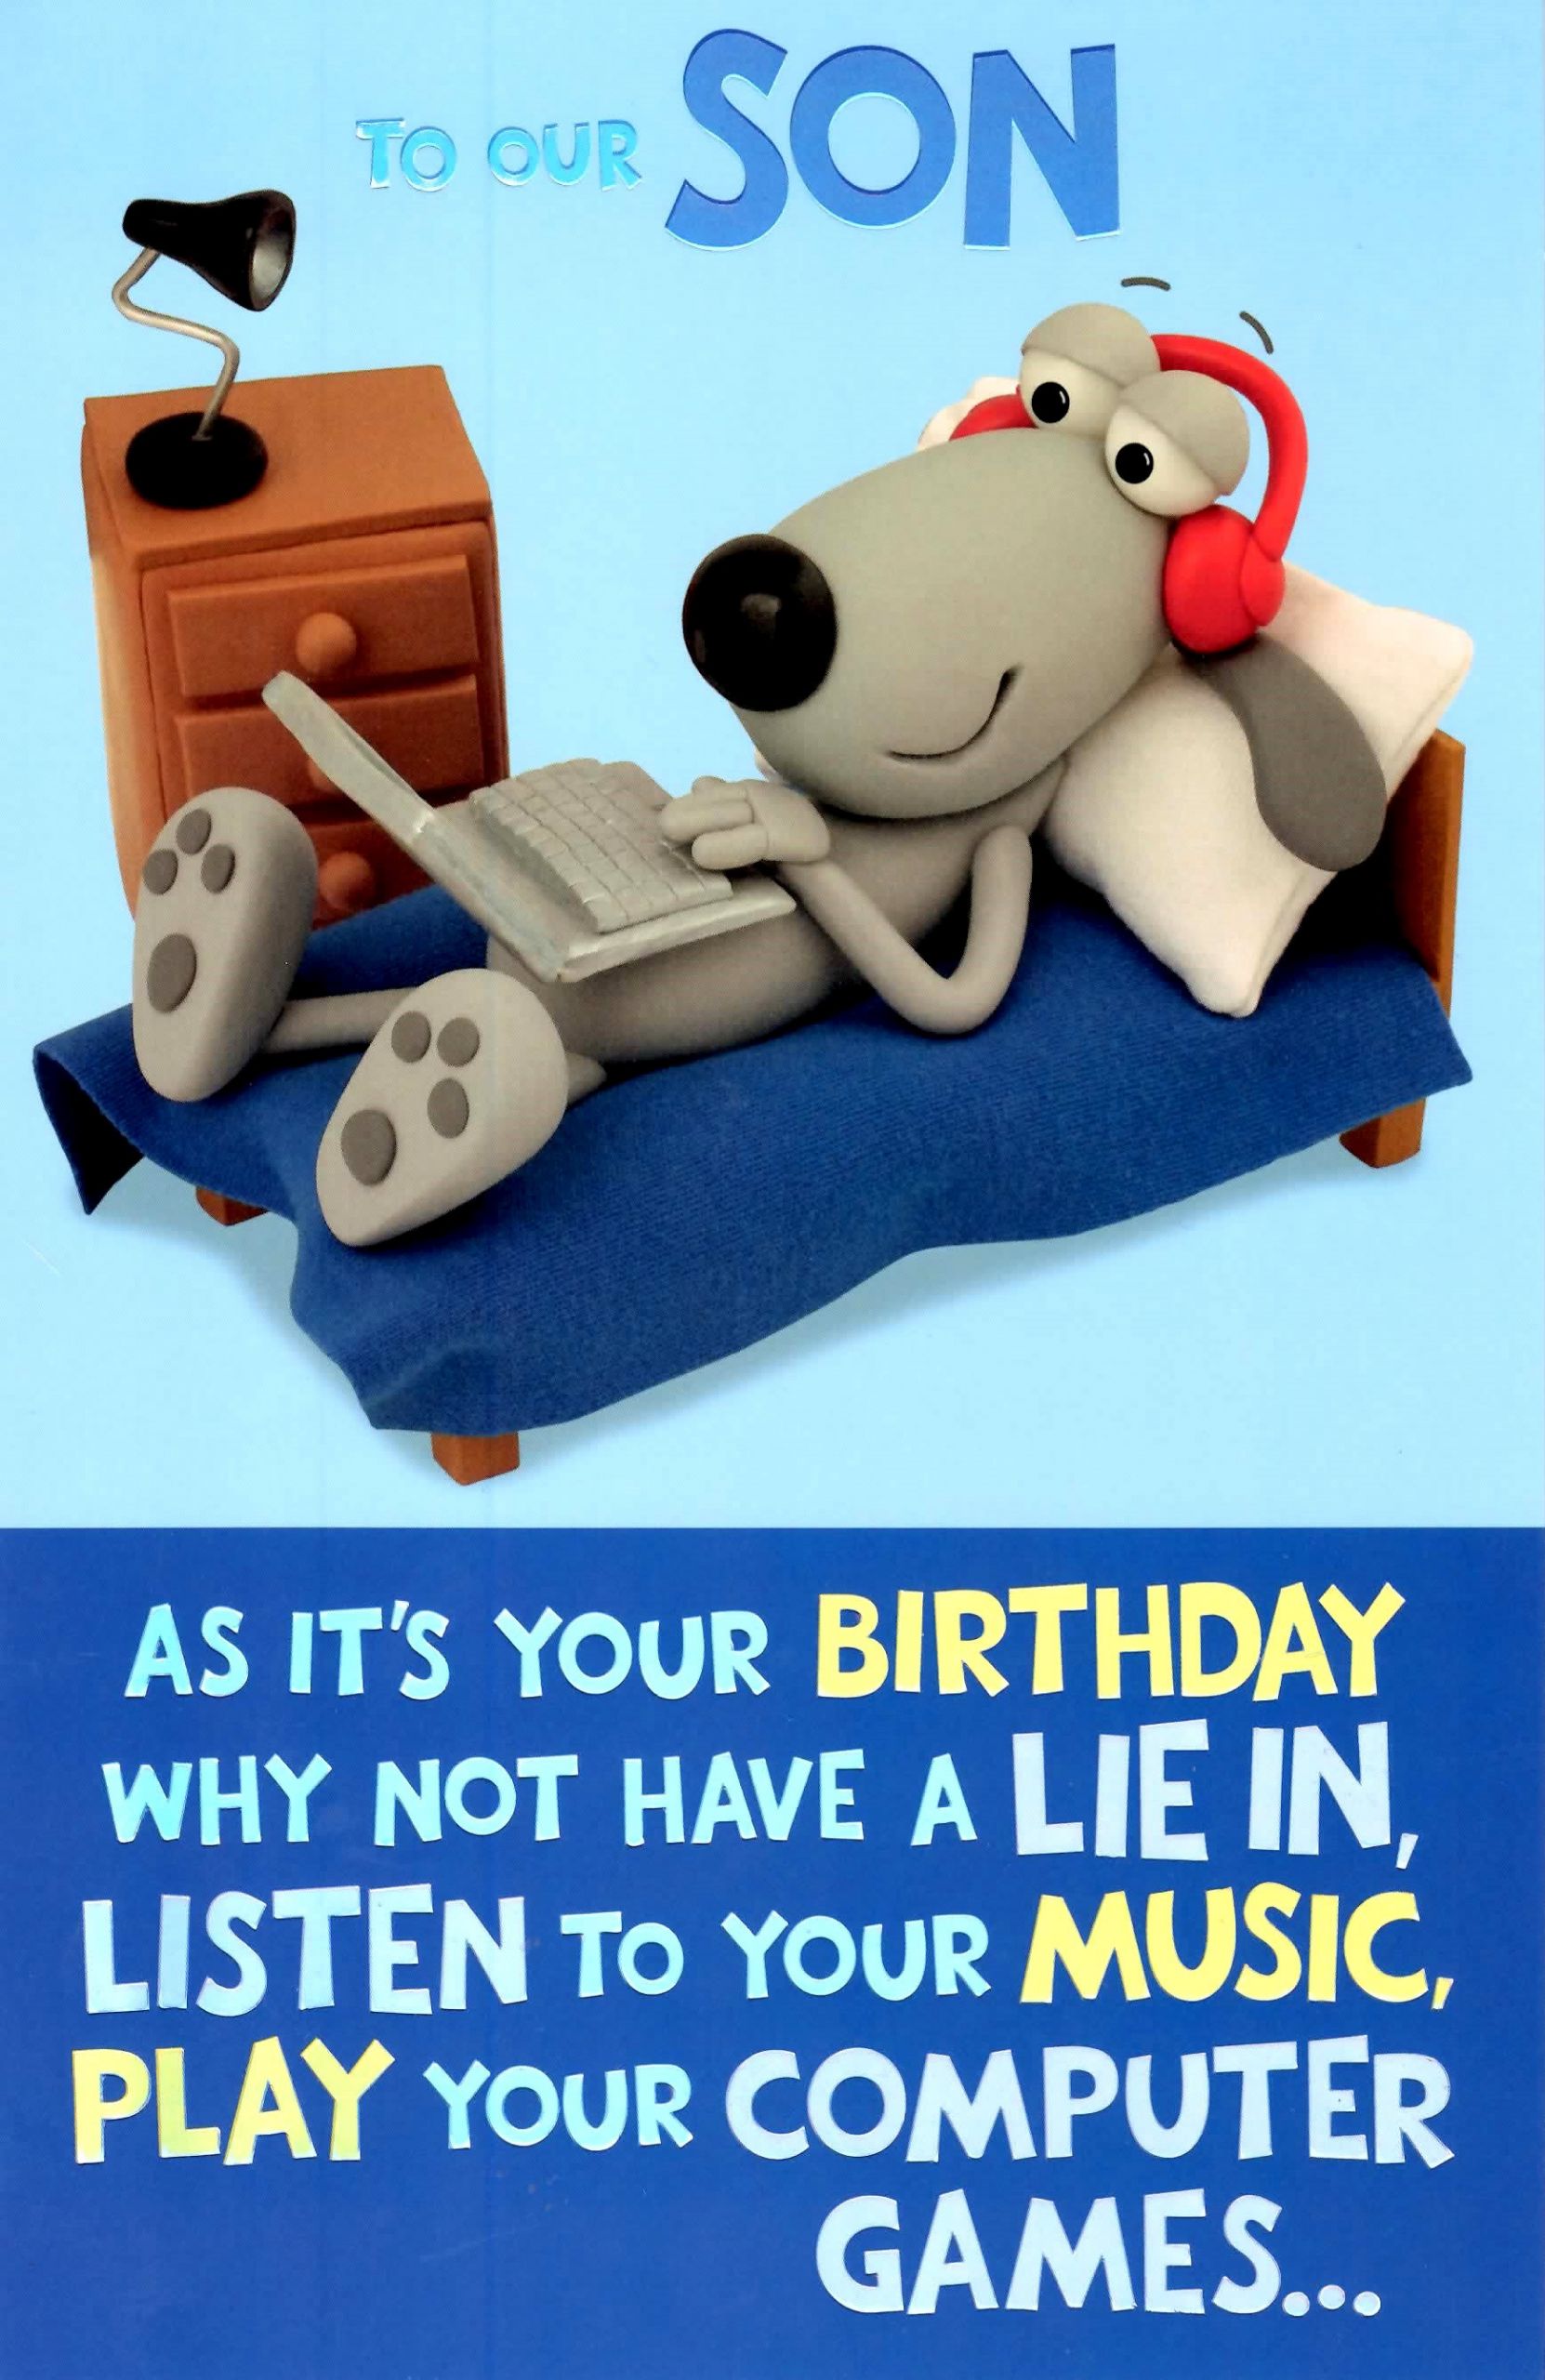 Funny Birthday Cards For Son
 Cute Funny To Our Son Birthday Greeting Card